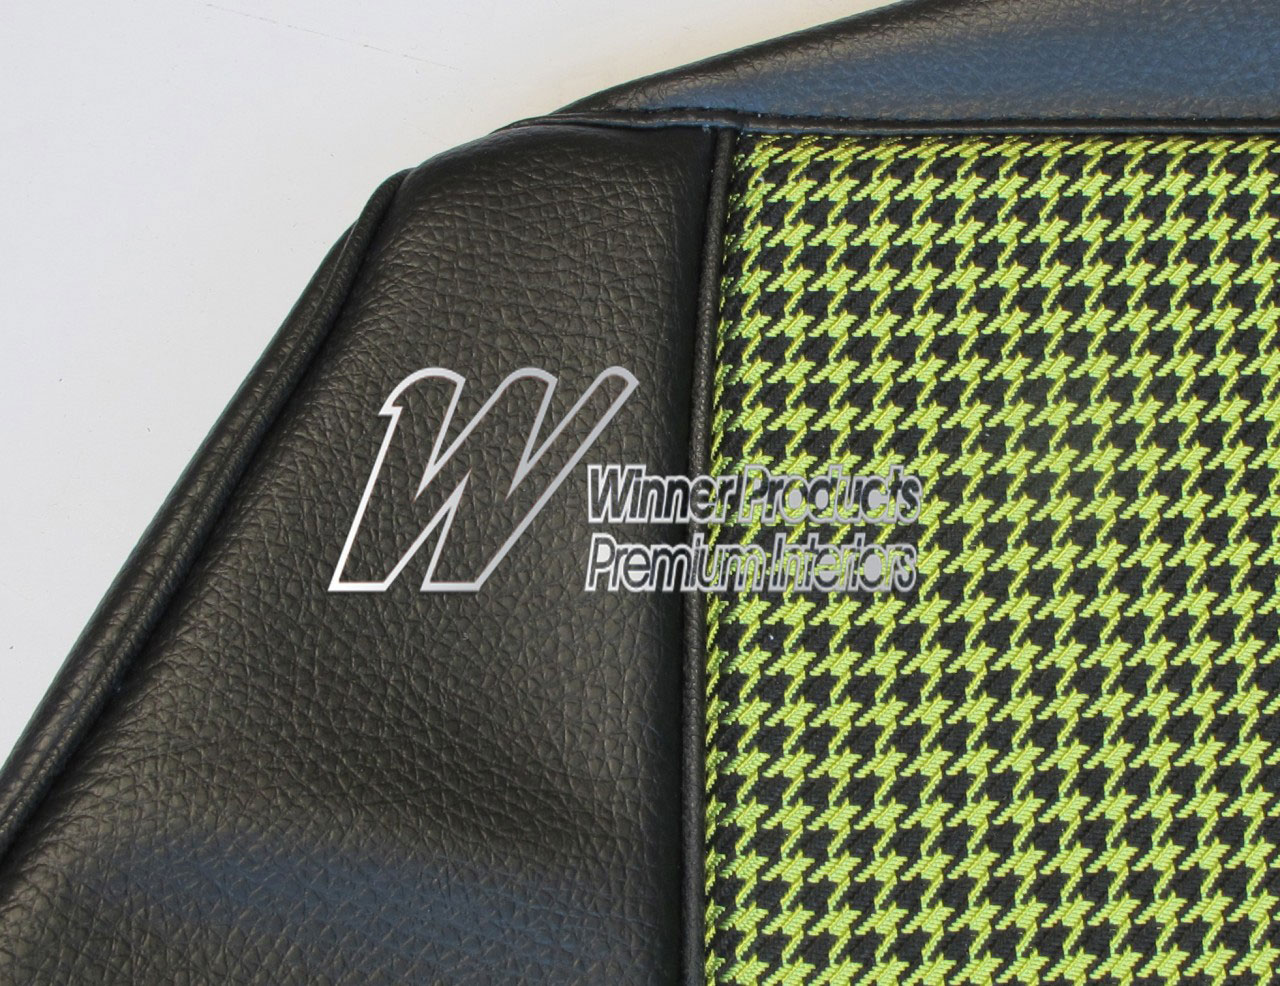 Holden Monaro HQ Monaro GTS Coupe Sep-Feb 73 10Z Black & Houndstooth Seat Covers (Image 3 of 9)